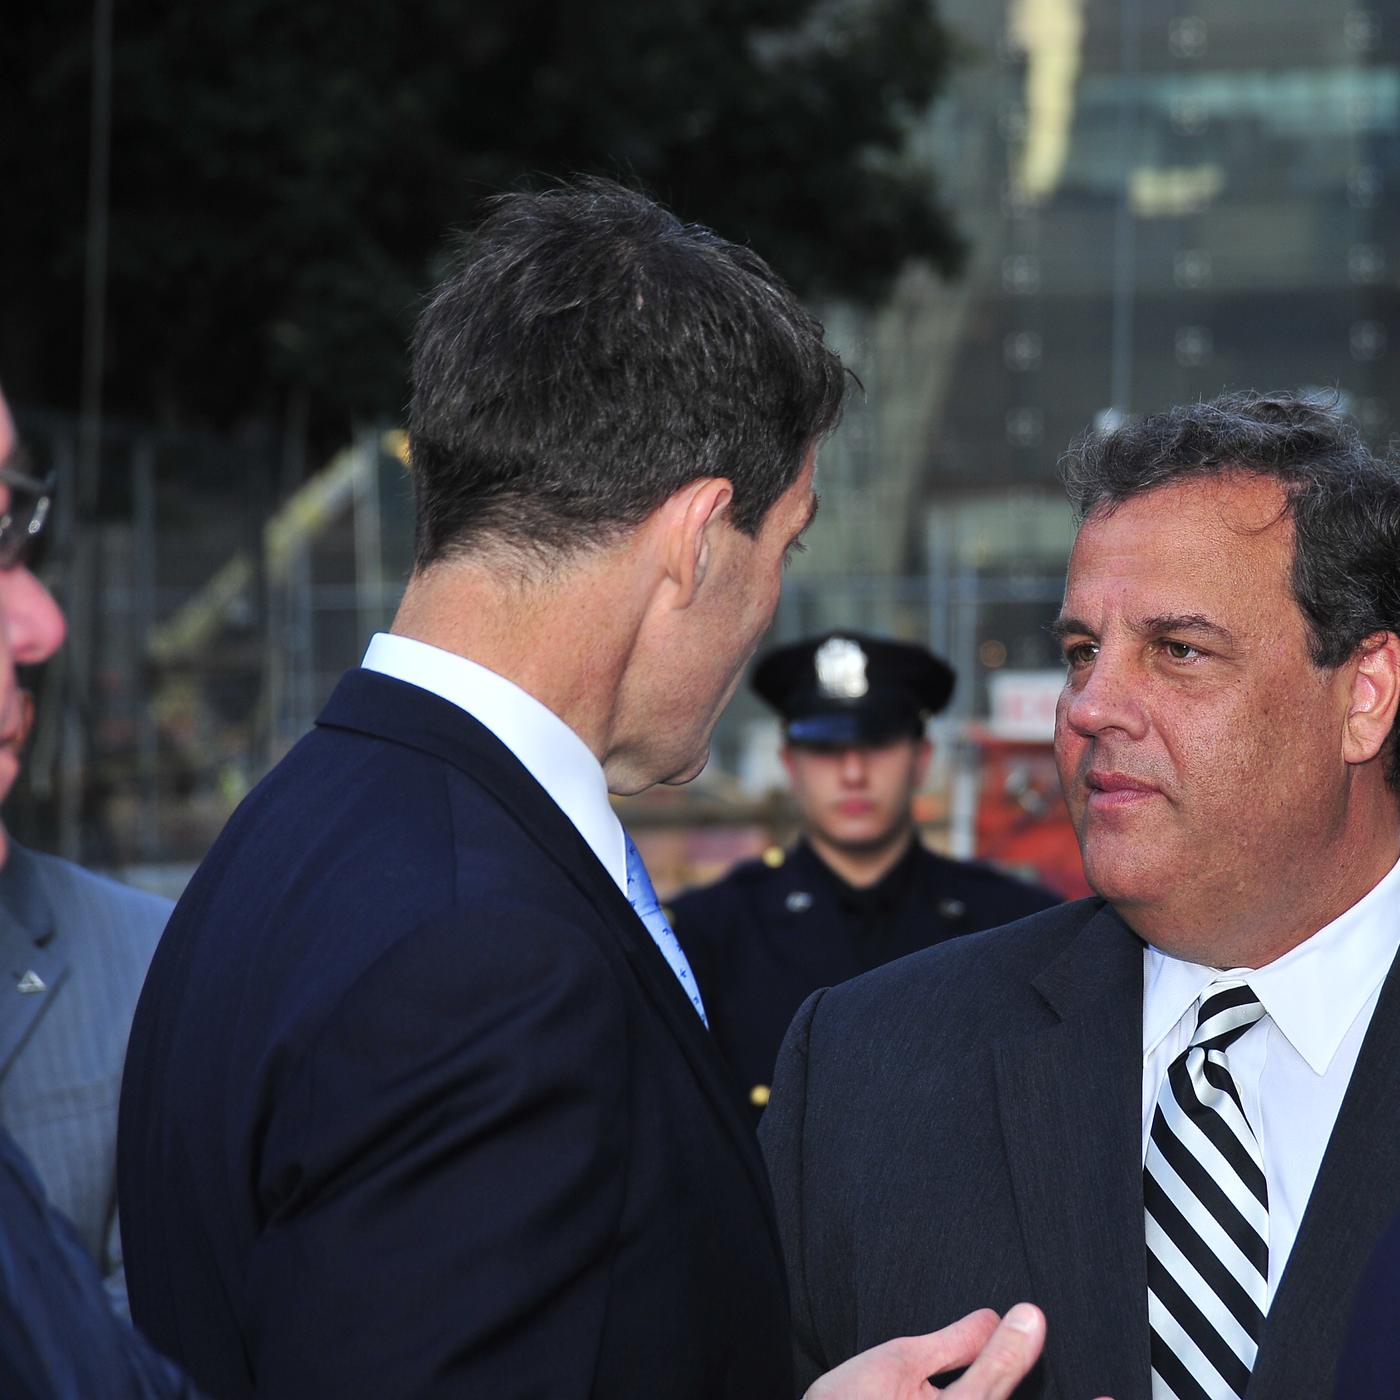 NJ Taxpayers Just Hired Another Lawyer for Christie